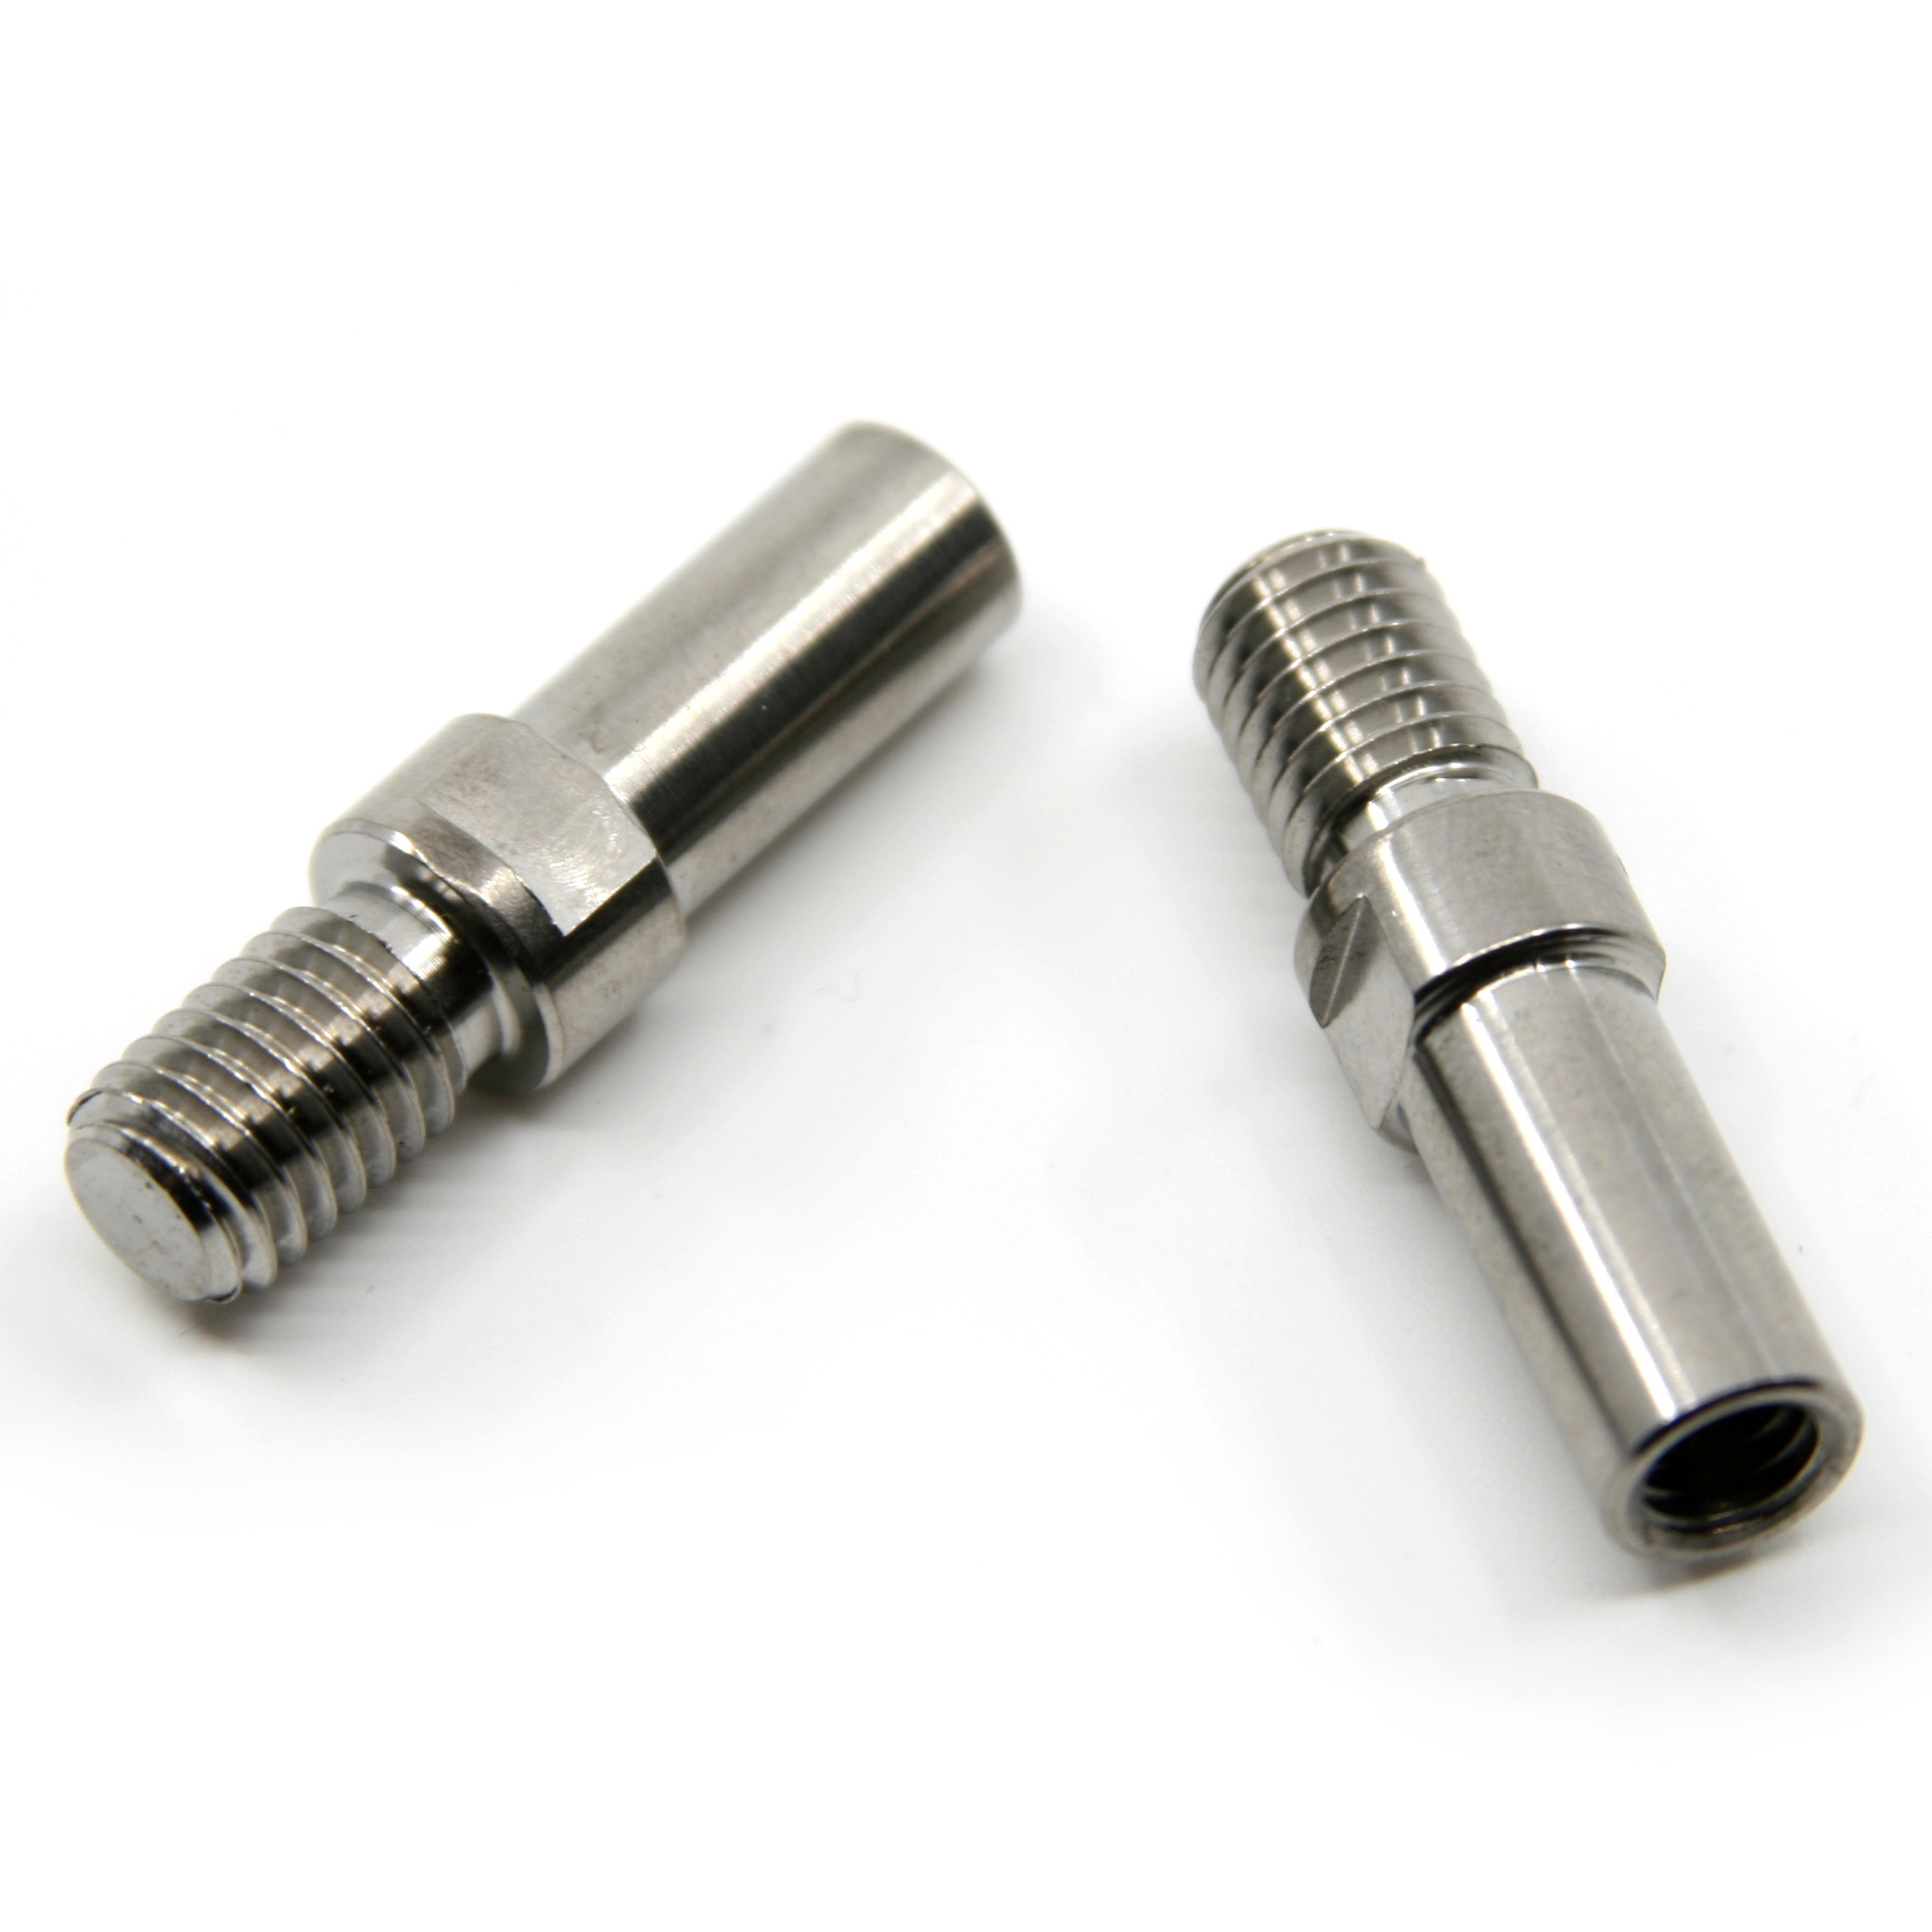 Titanium Brake Studs/Boss for Rockshox Jett, SID, & Indy Forks – Specialty Products